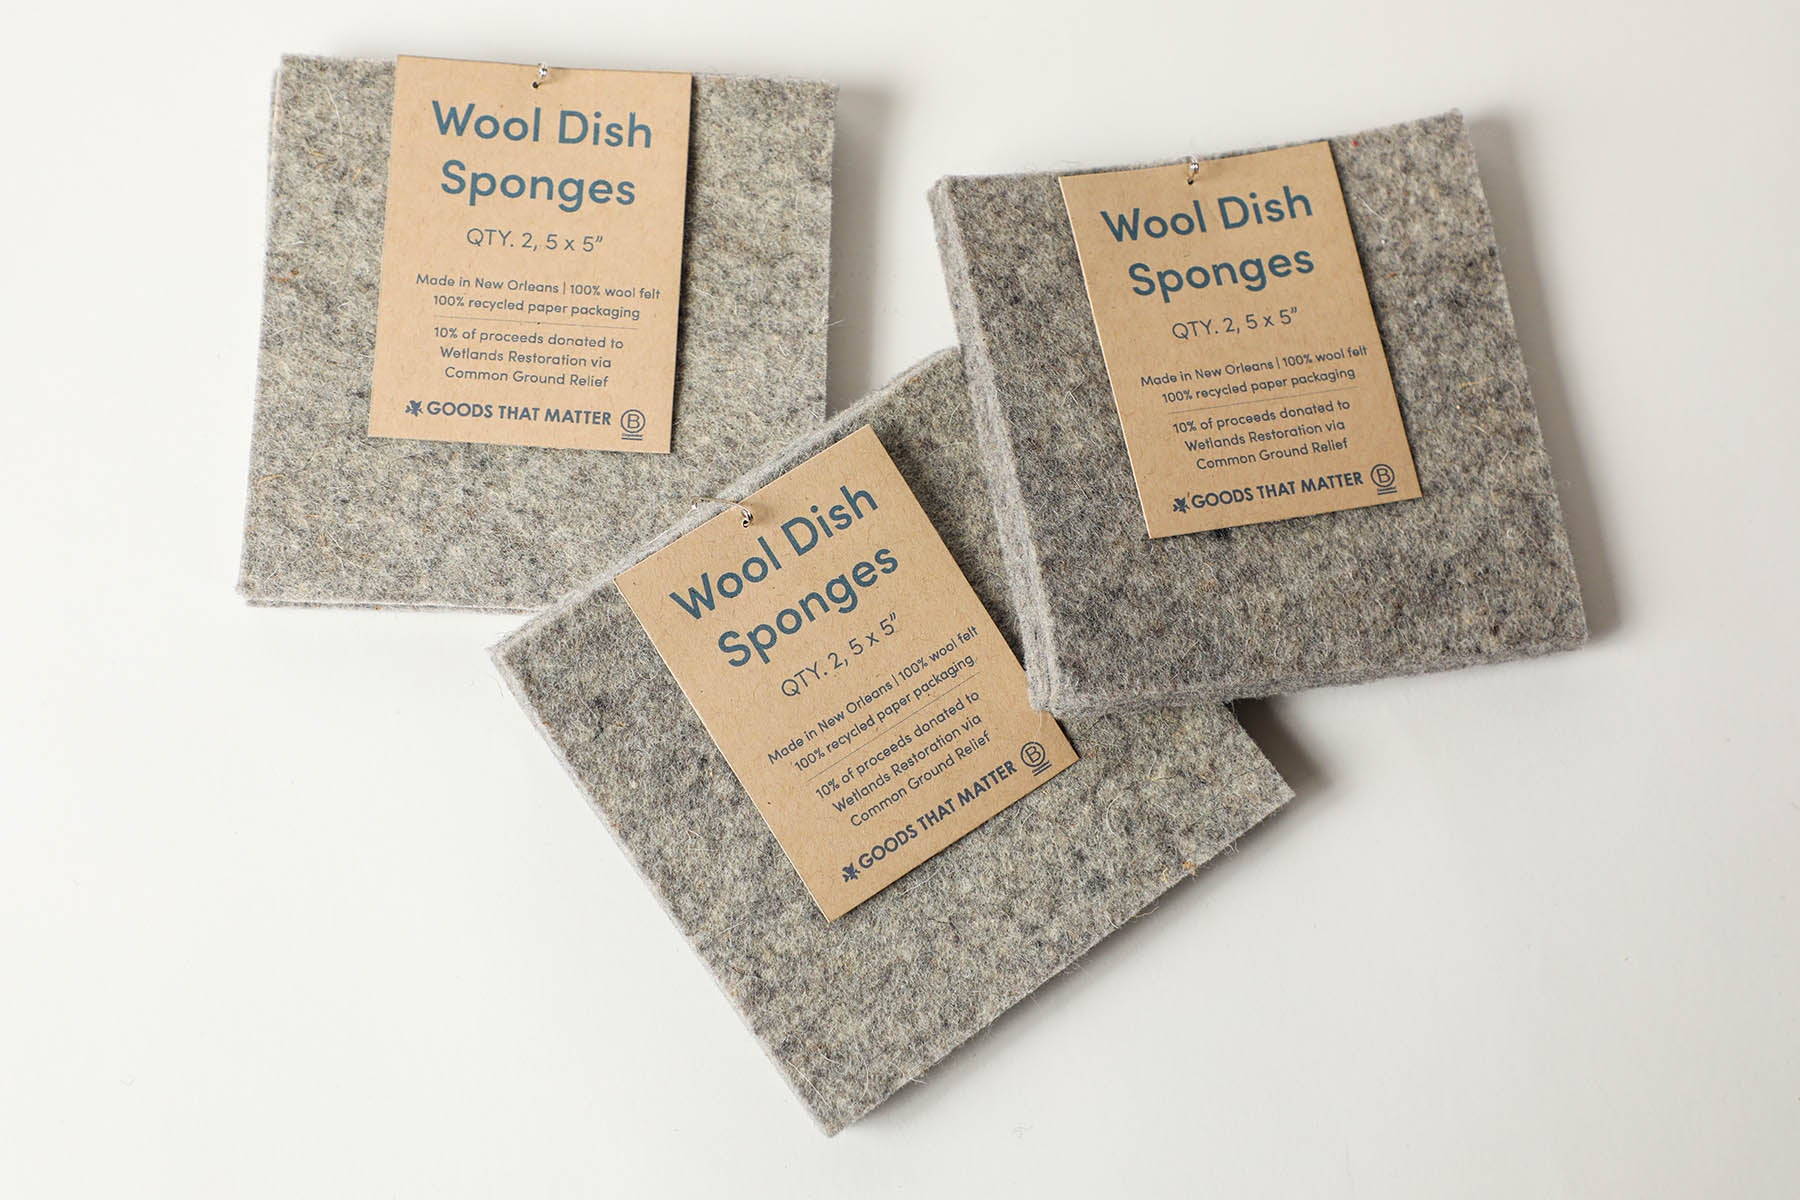 Wool Dish Sponges - Gives to Common Ground Relief, Coastal Climate Credits